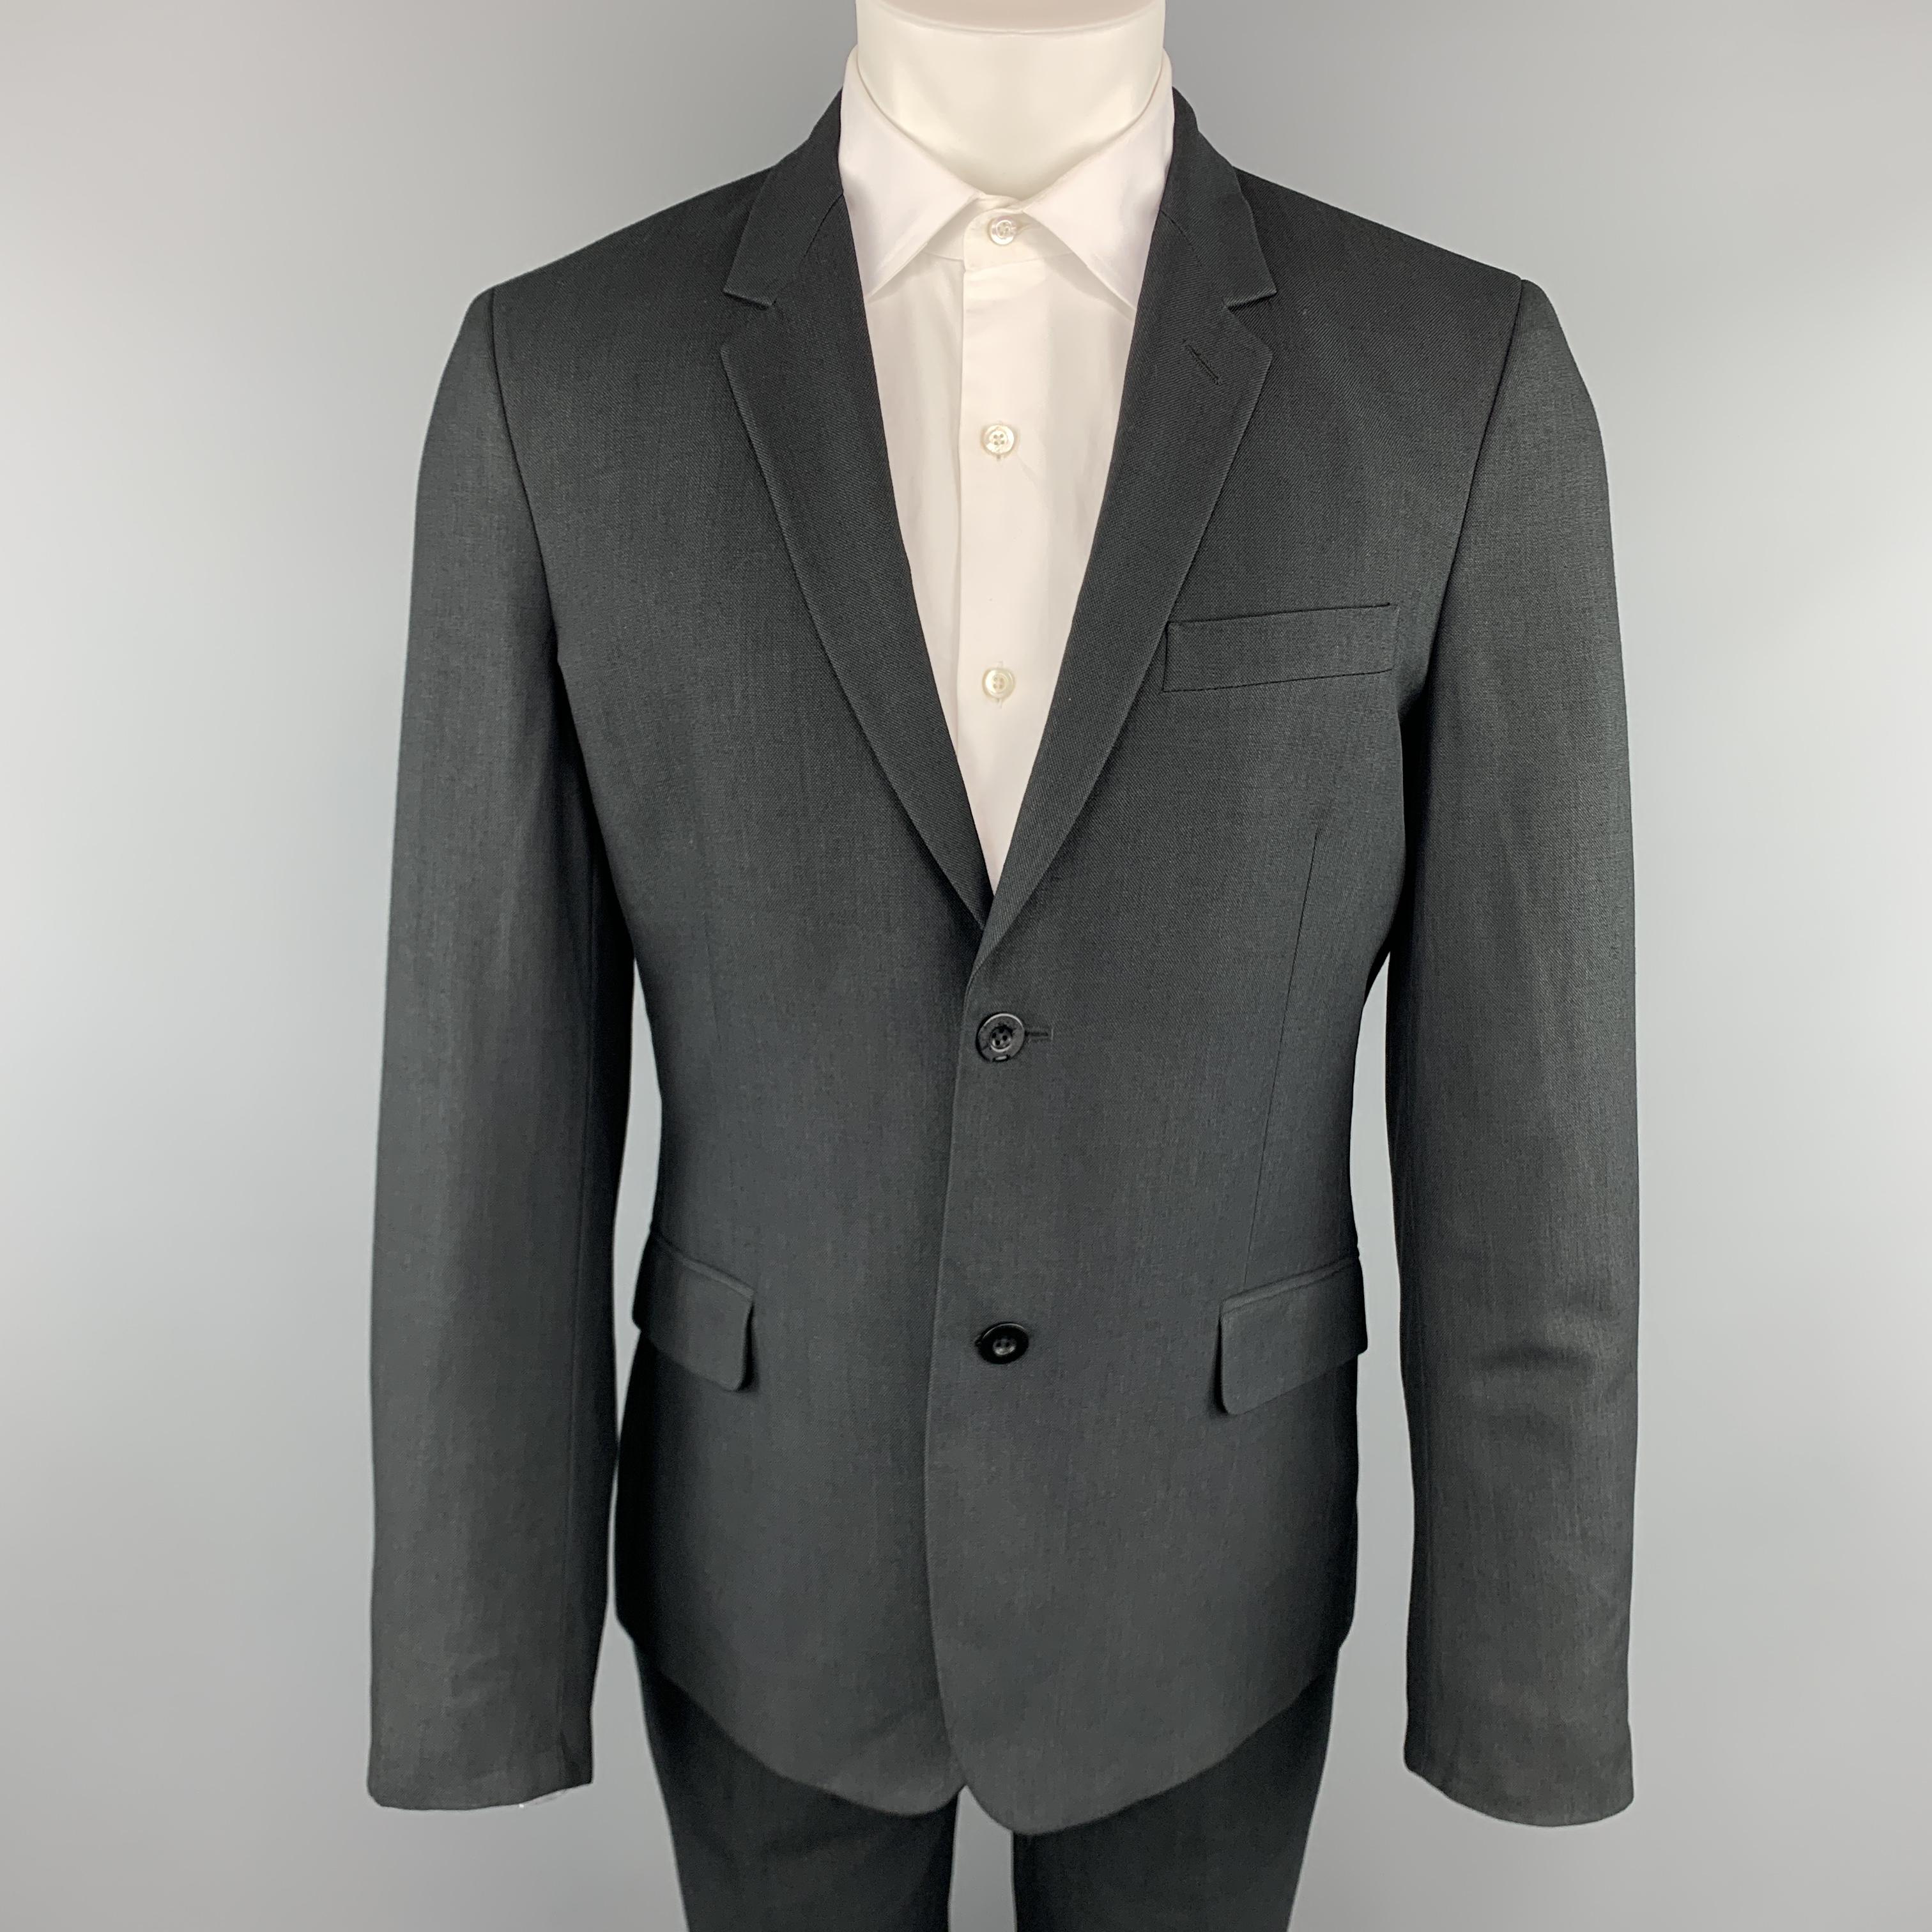 MARC JACOBS suit comes in charcoal woven wool blend fabric and includes a single breasted, two button sport coat with a notch lapel and matching flat front trousers. Made in Italy.

Excellent Pre-Owned Condition.
Marked: IT